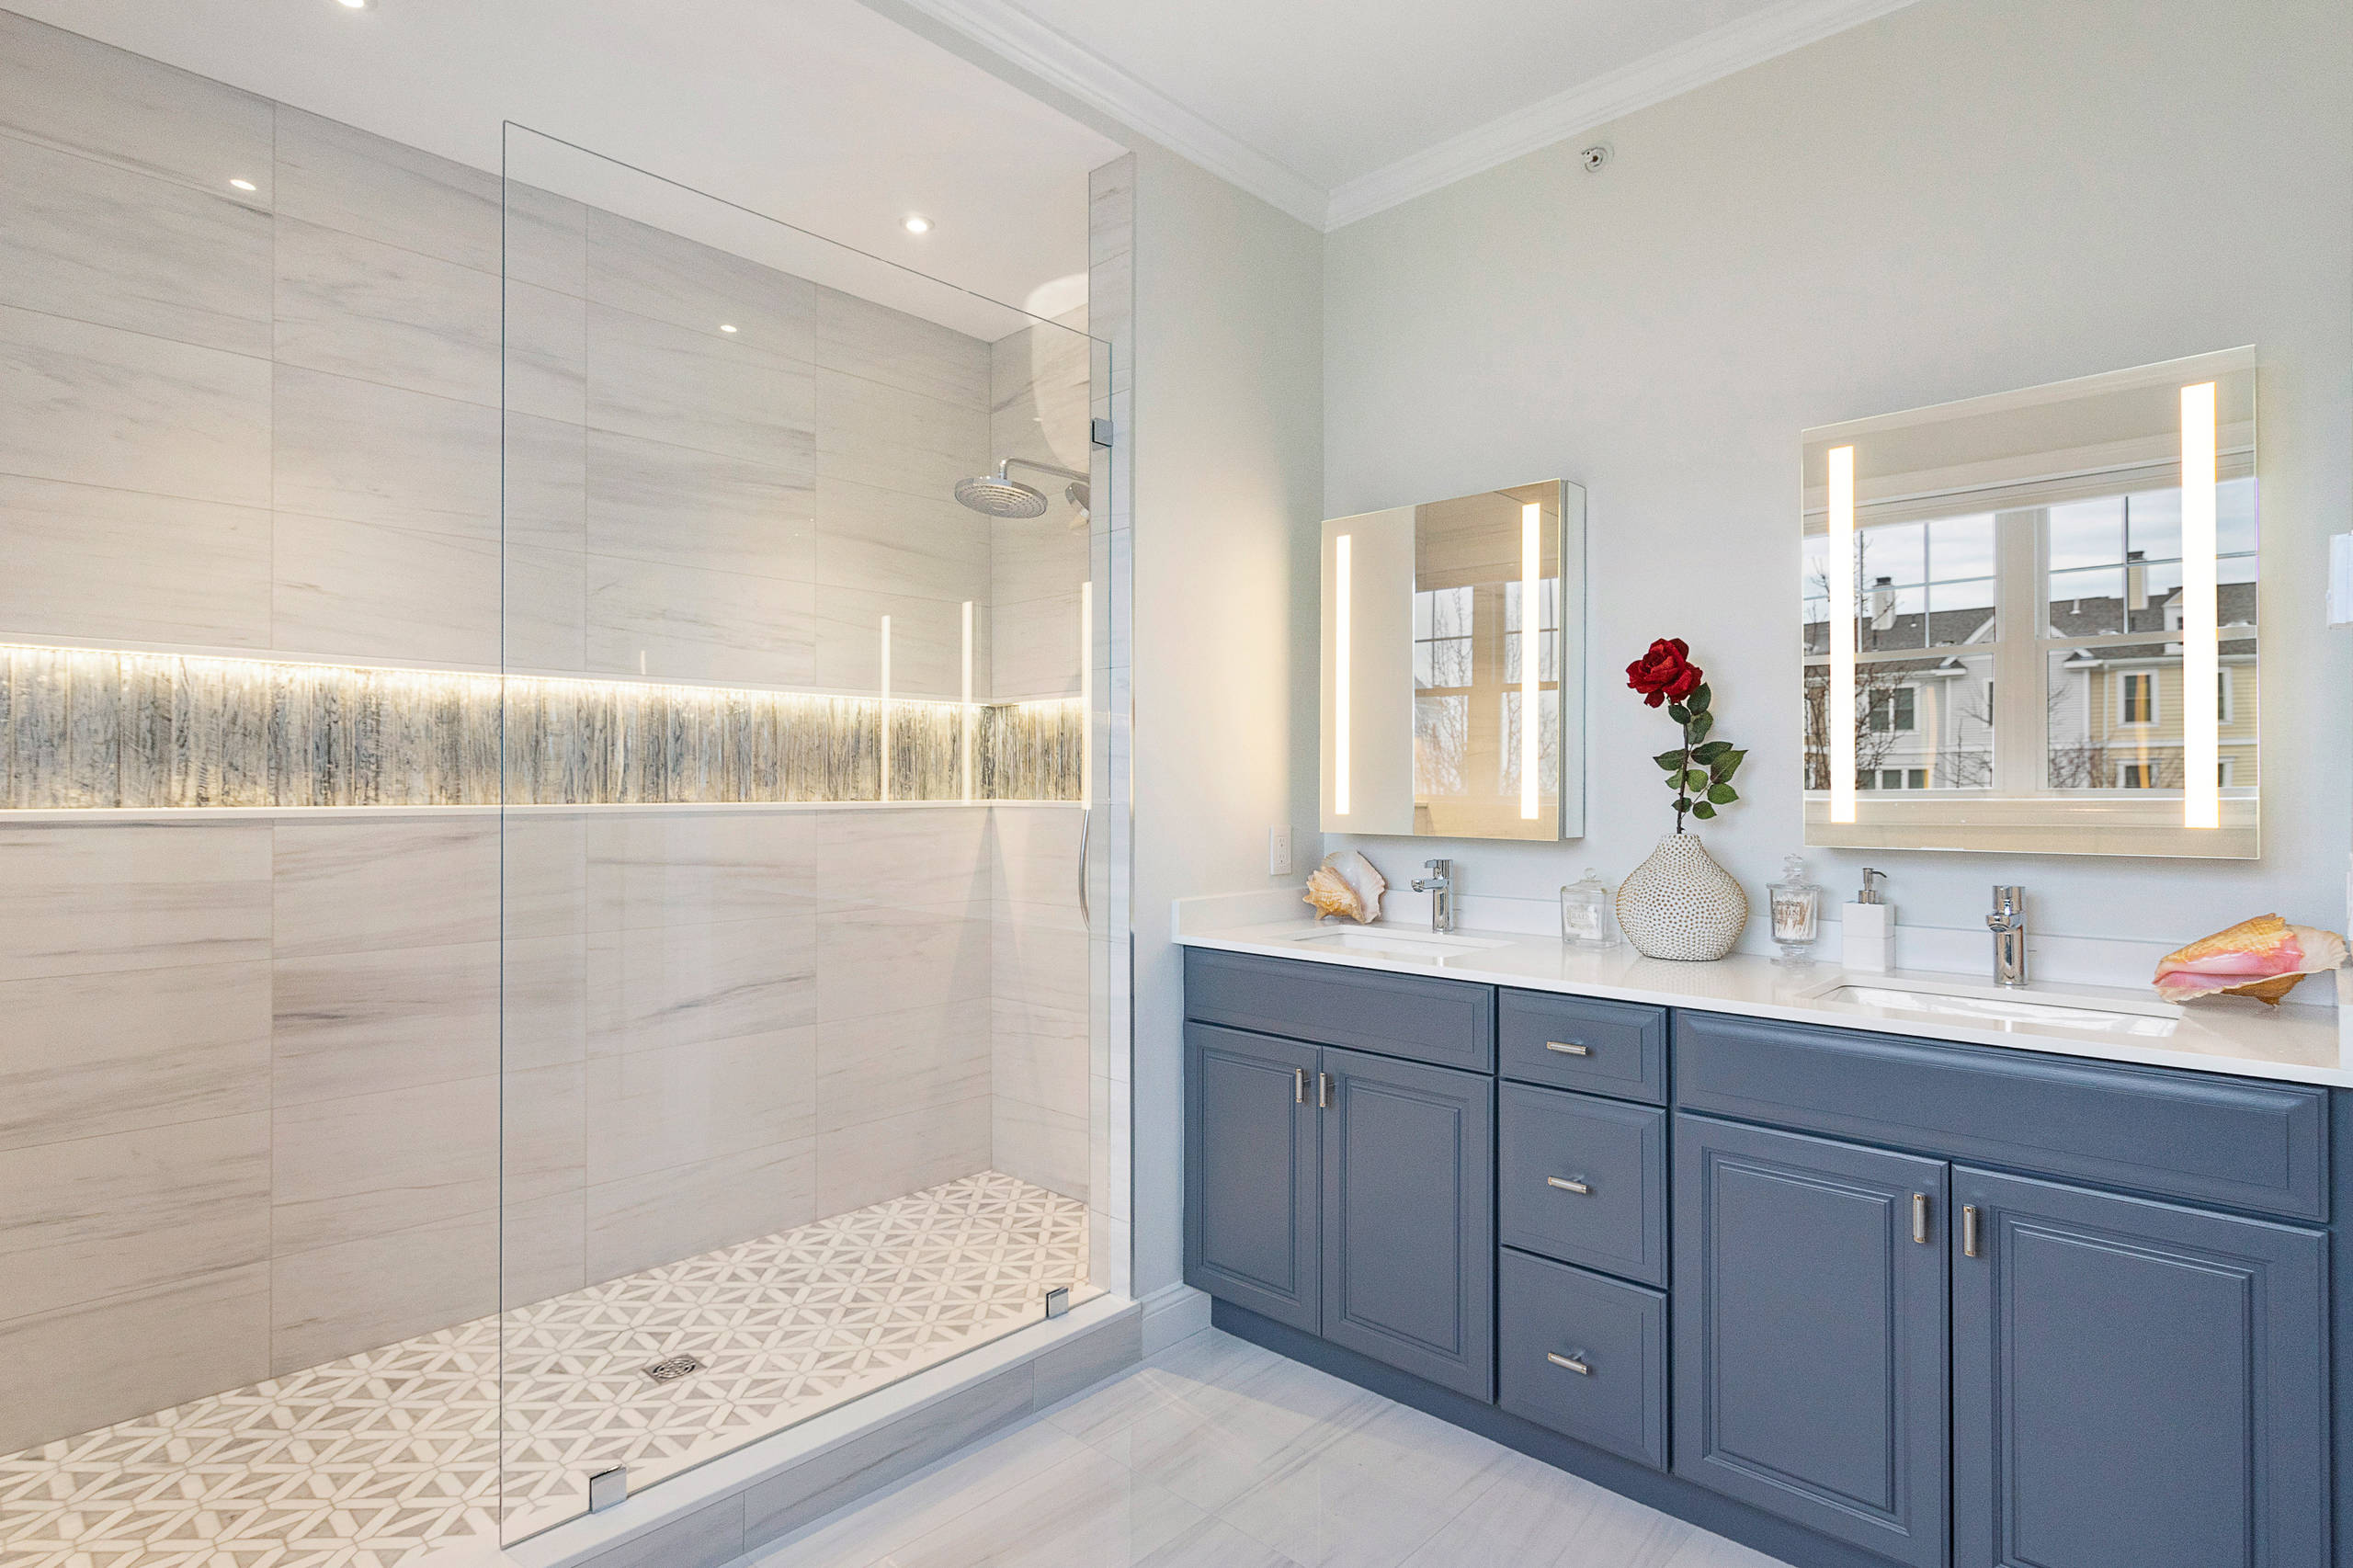 999 Beautiful Porcelain Tile Bathroom Pictures Ideas October 2020 Houzz,Queen Size Mattress Dimensions In Cm